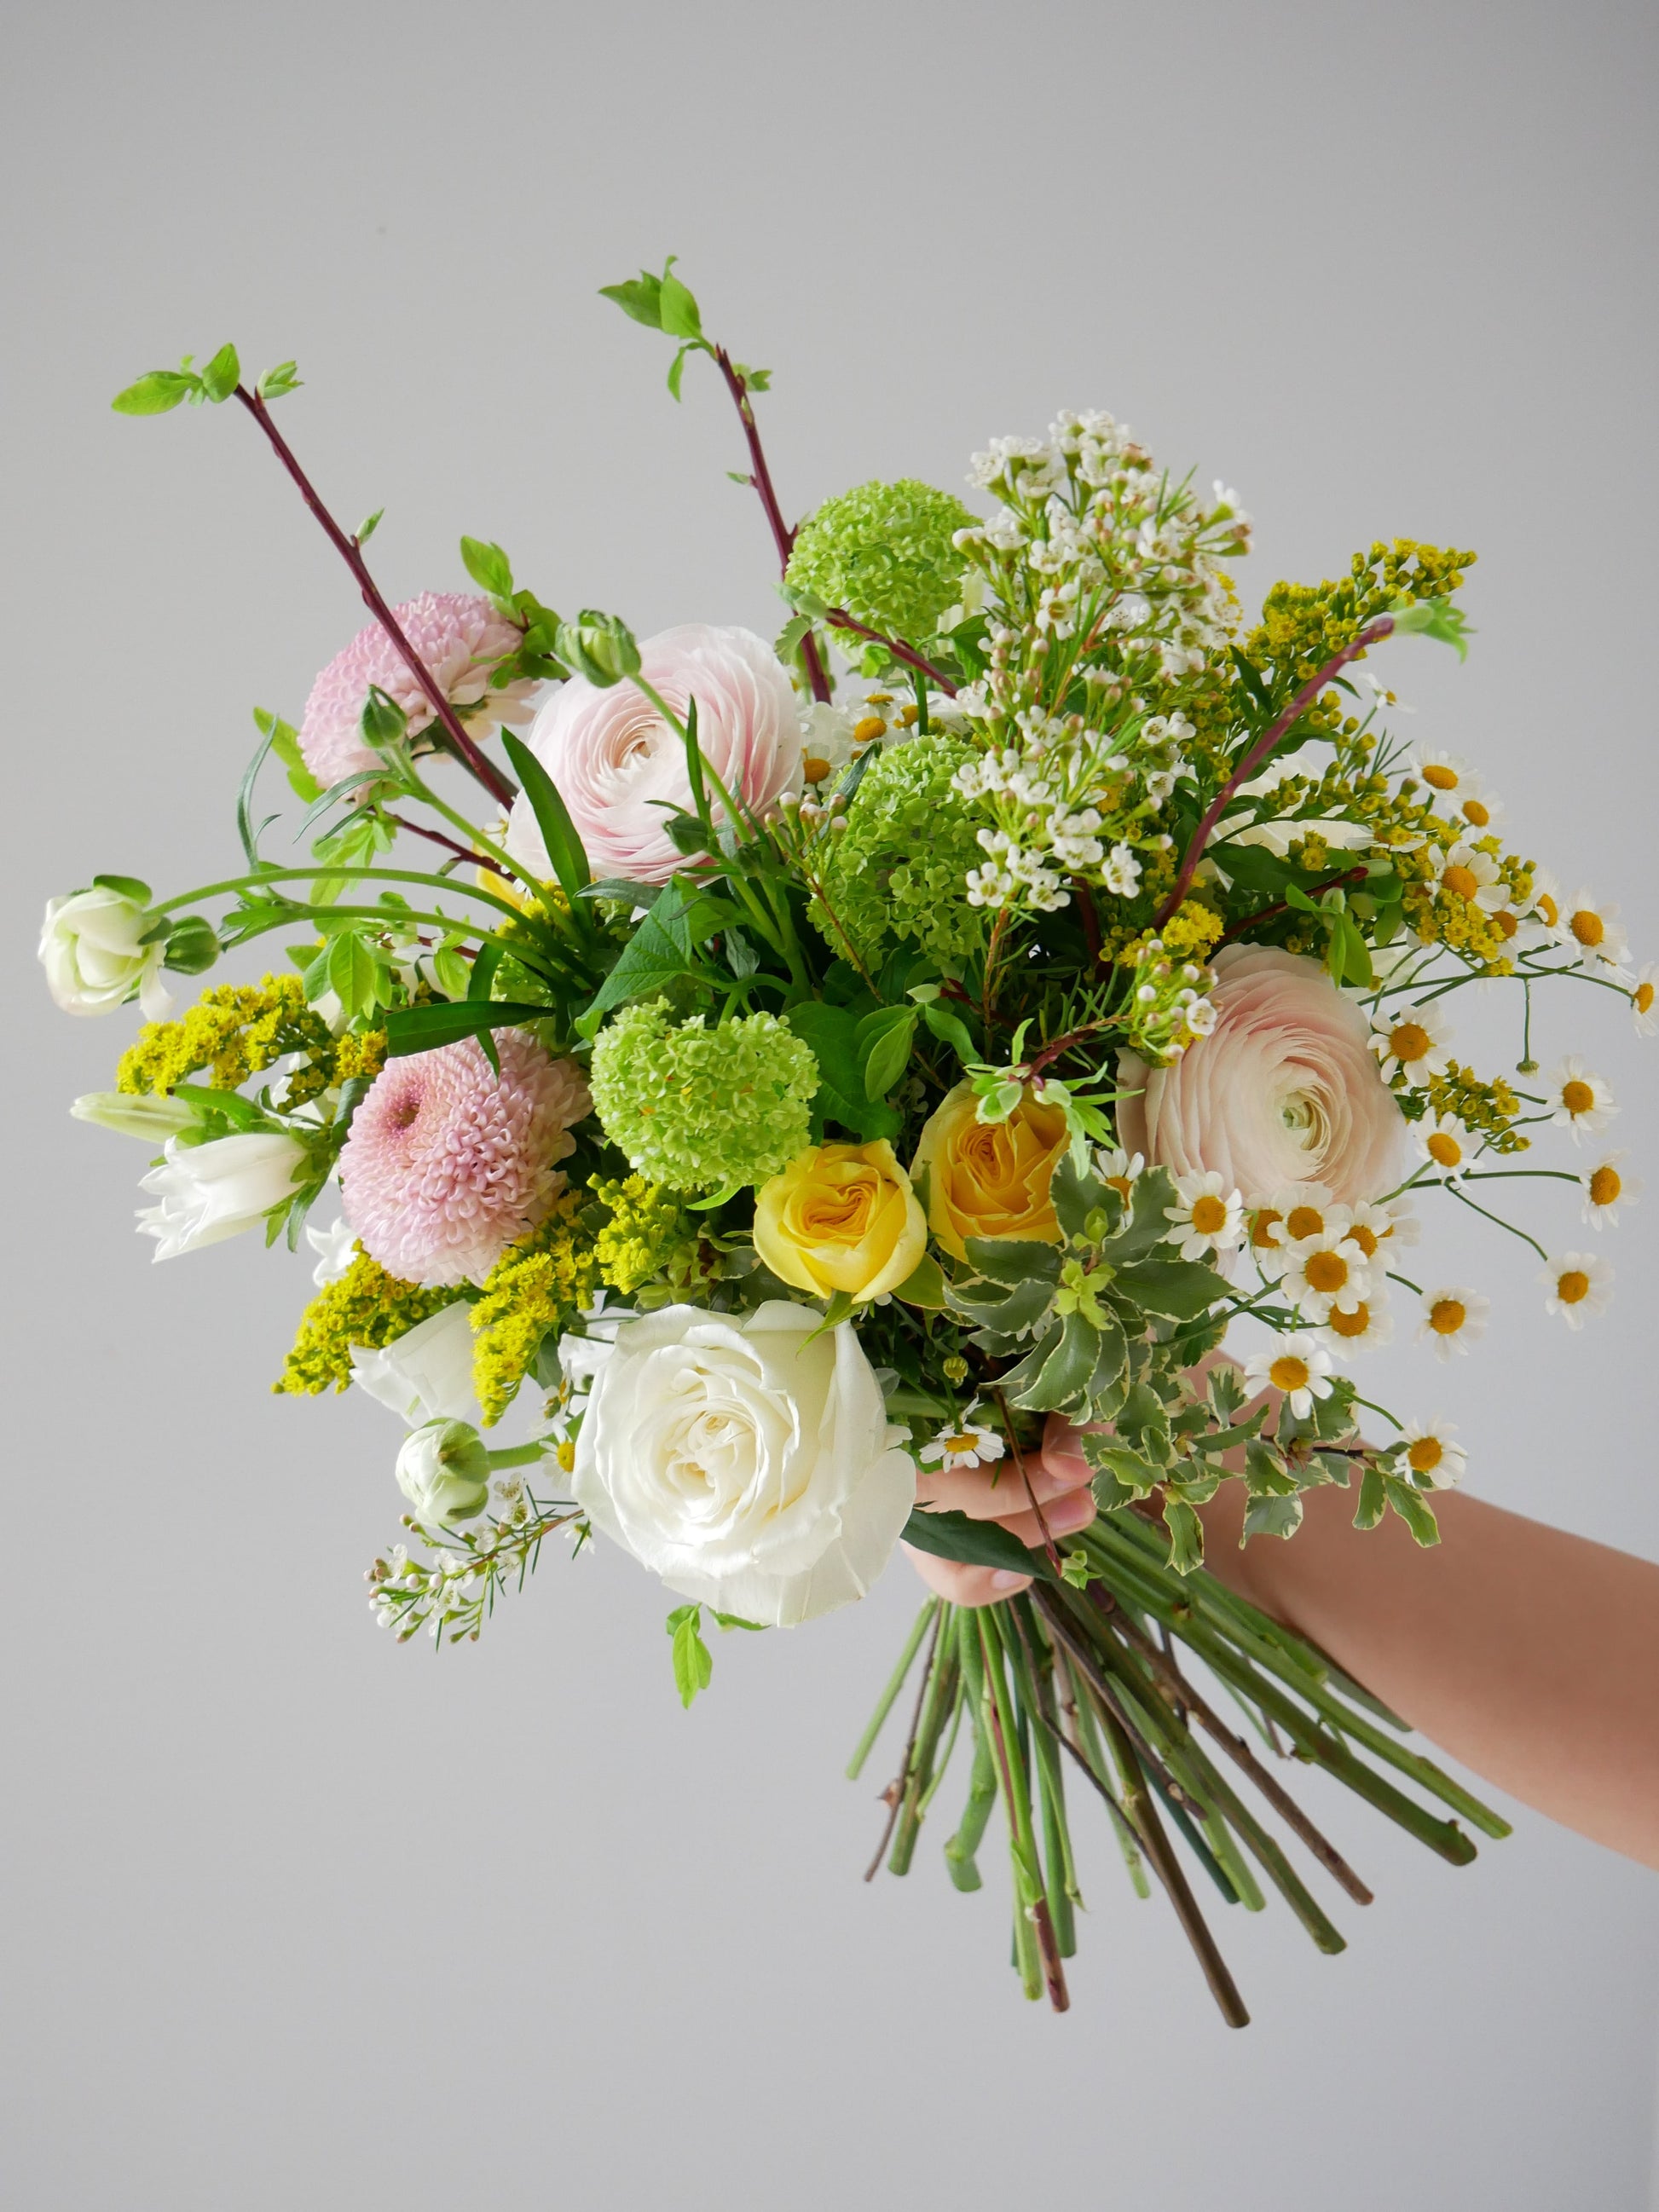 Bouquet in garden style featuring light pink ranunculus, chrysanthemum, white roses, yellow spray roses, viburnum and more